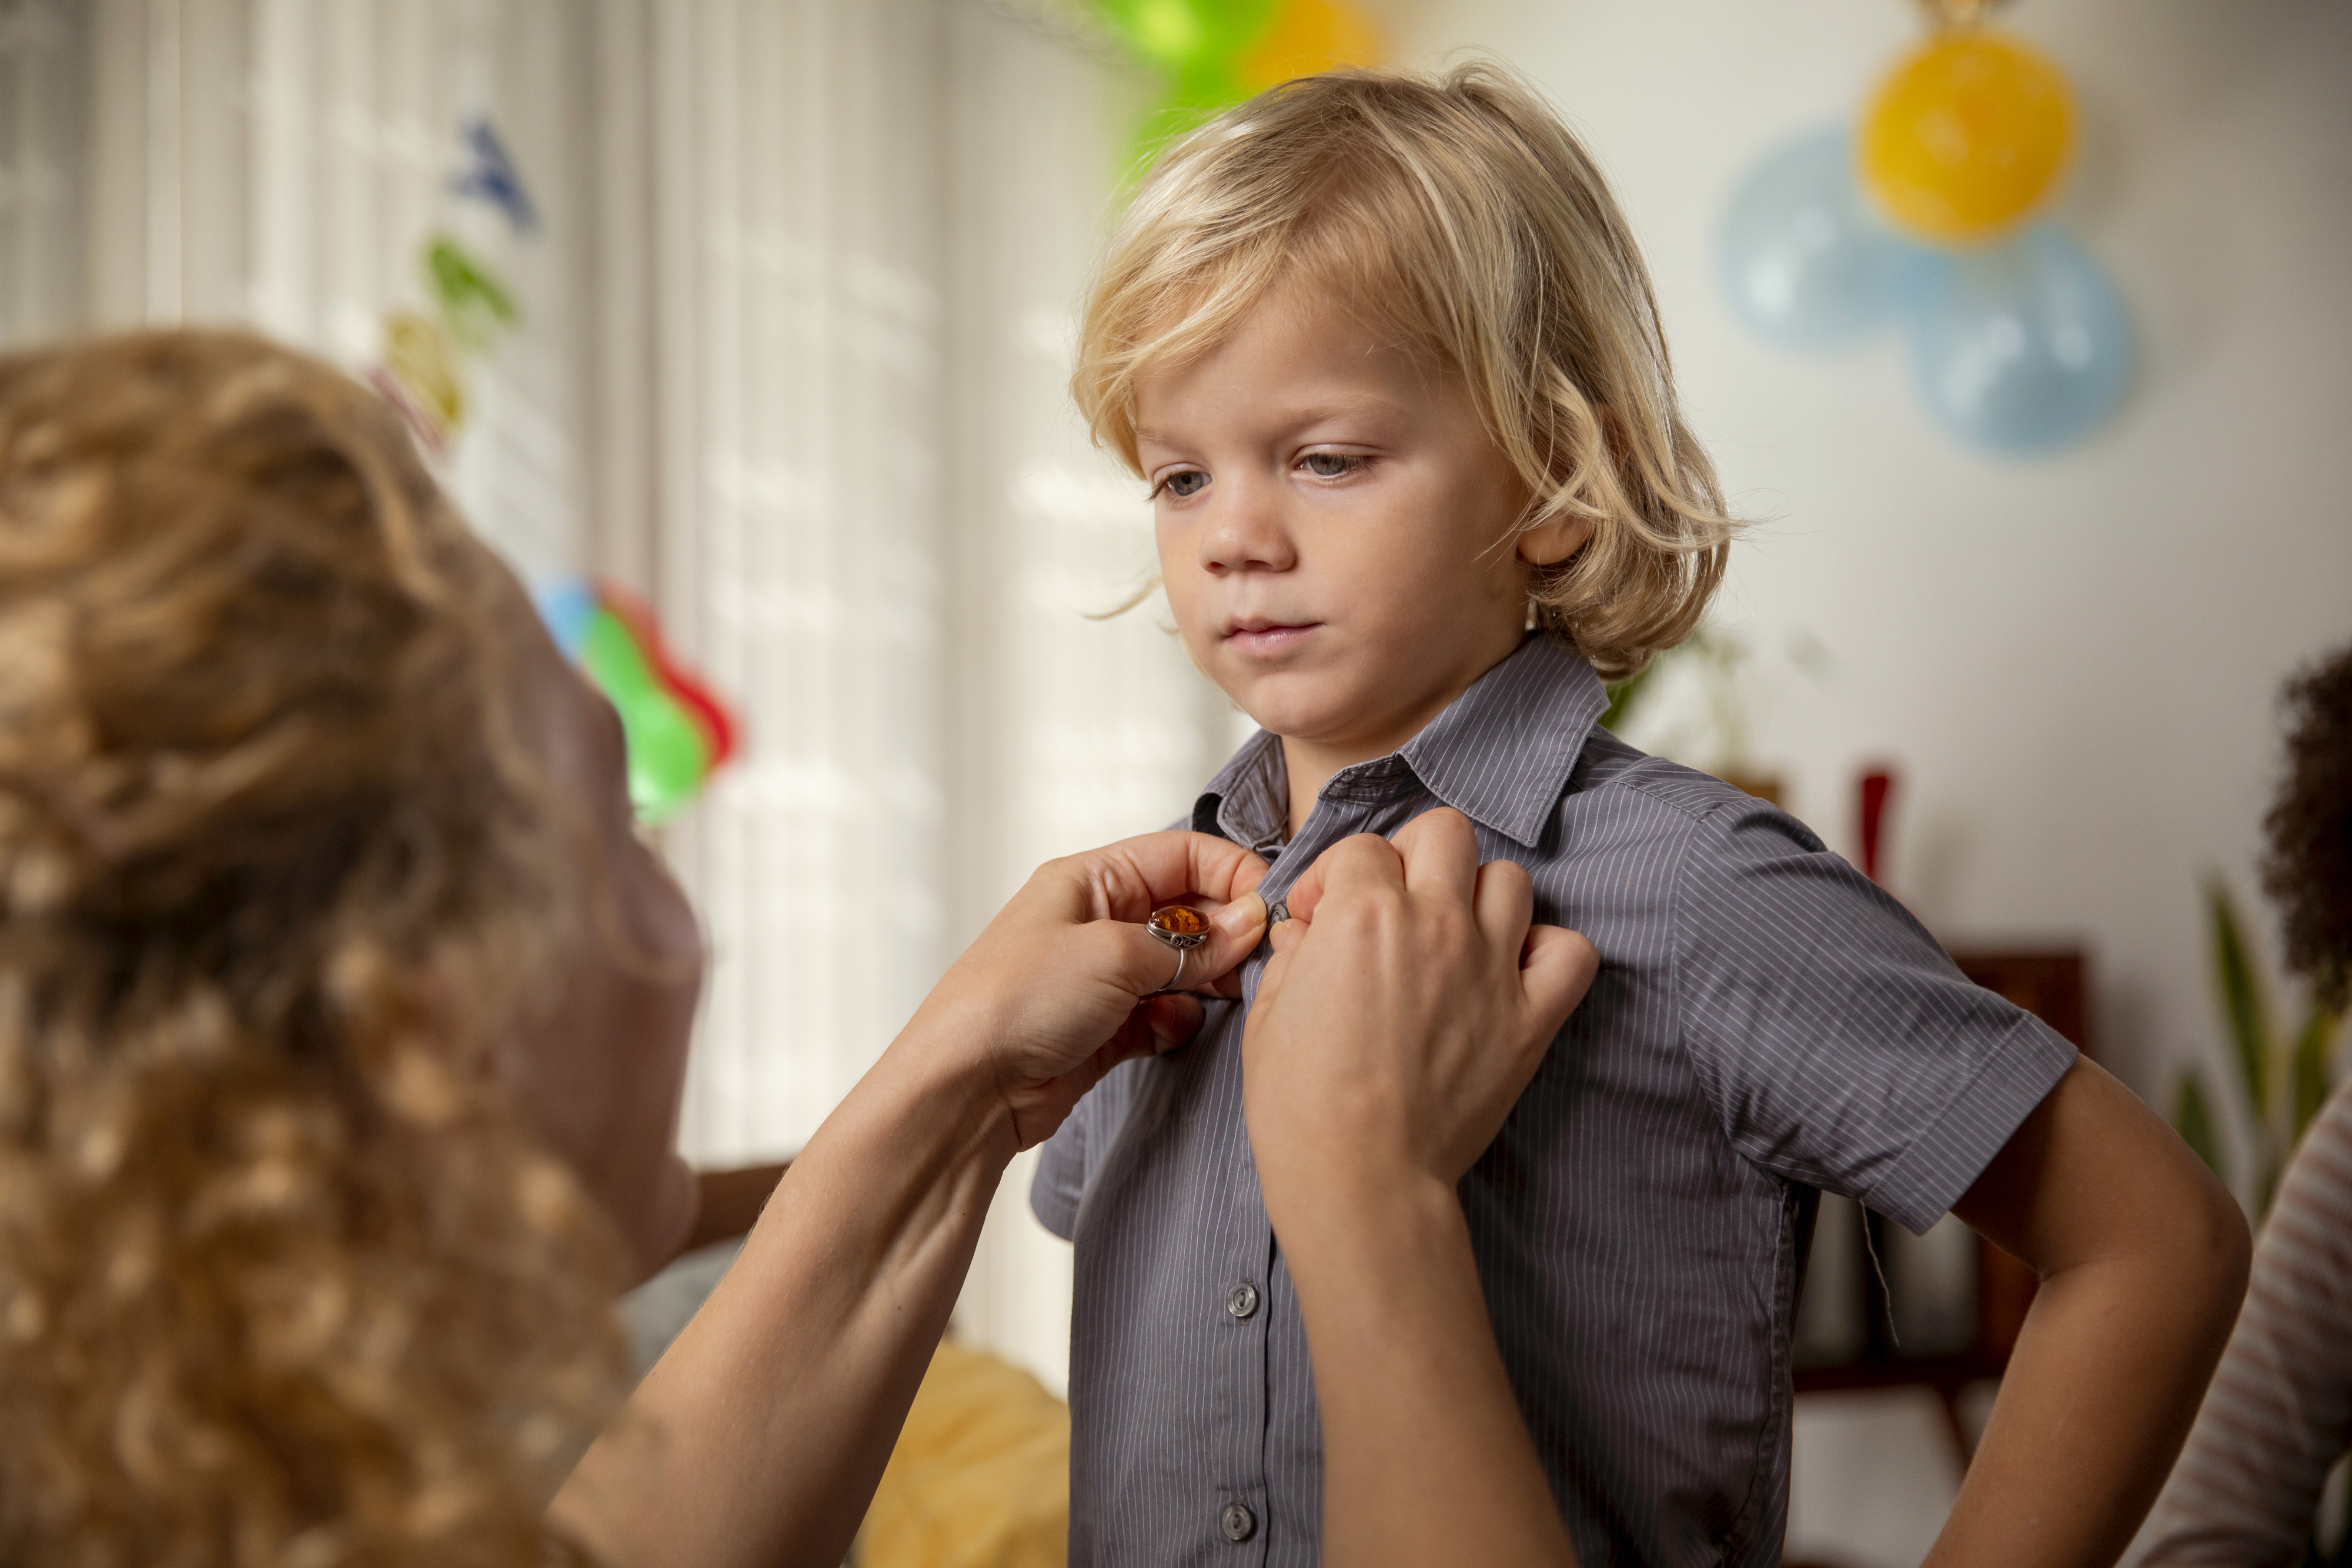 Adult helps a child in a shirt and tie get ready, possibly for a formal event